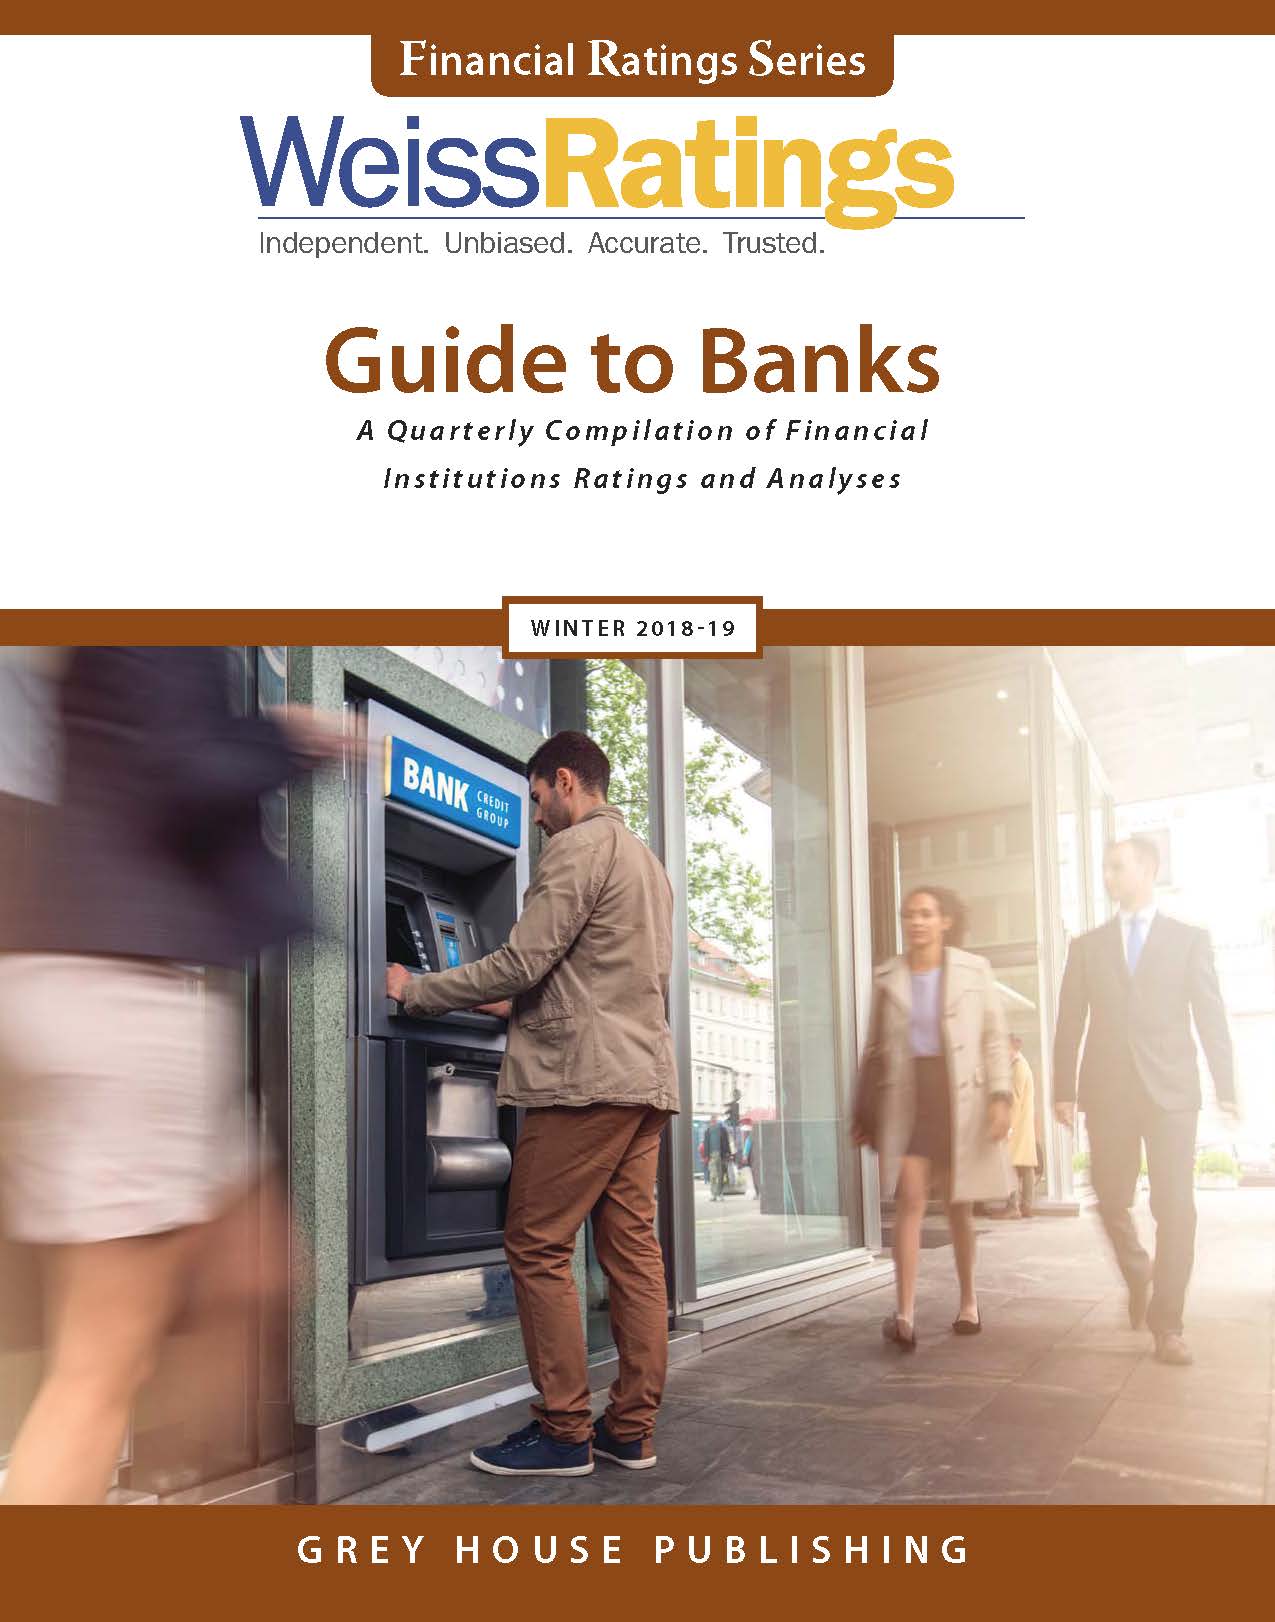 Weiss Ratings Guide to Banks